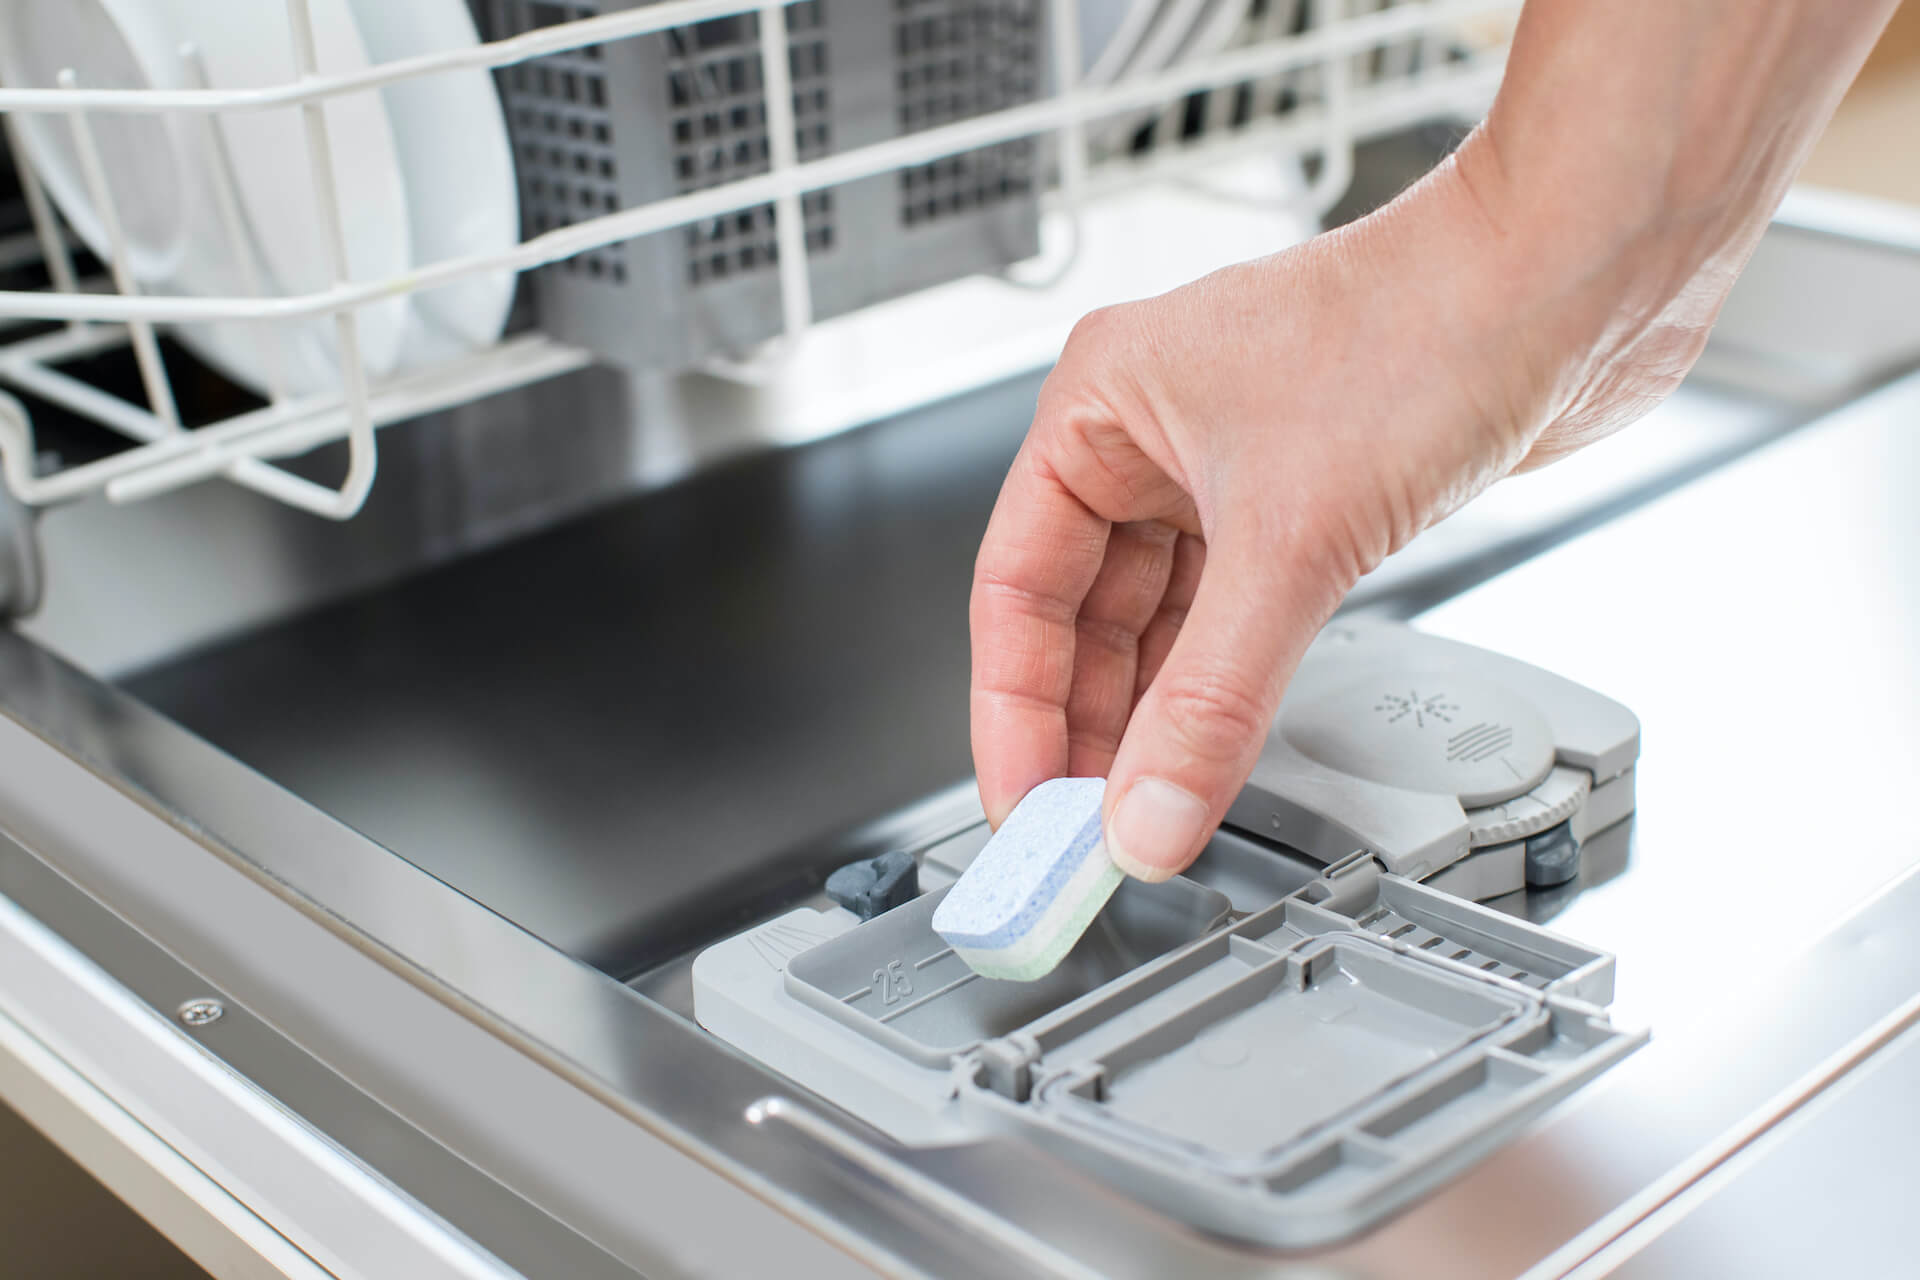 A person placing a dishwashing tablet in the dishwashing tablet dispenser